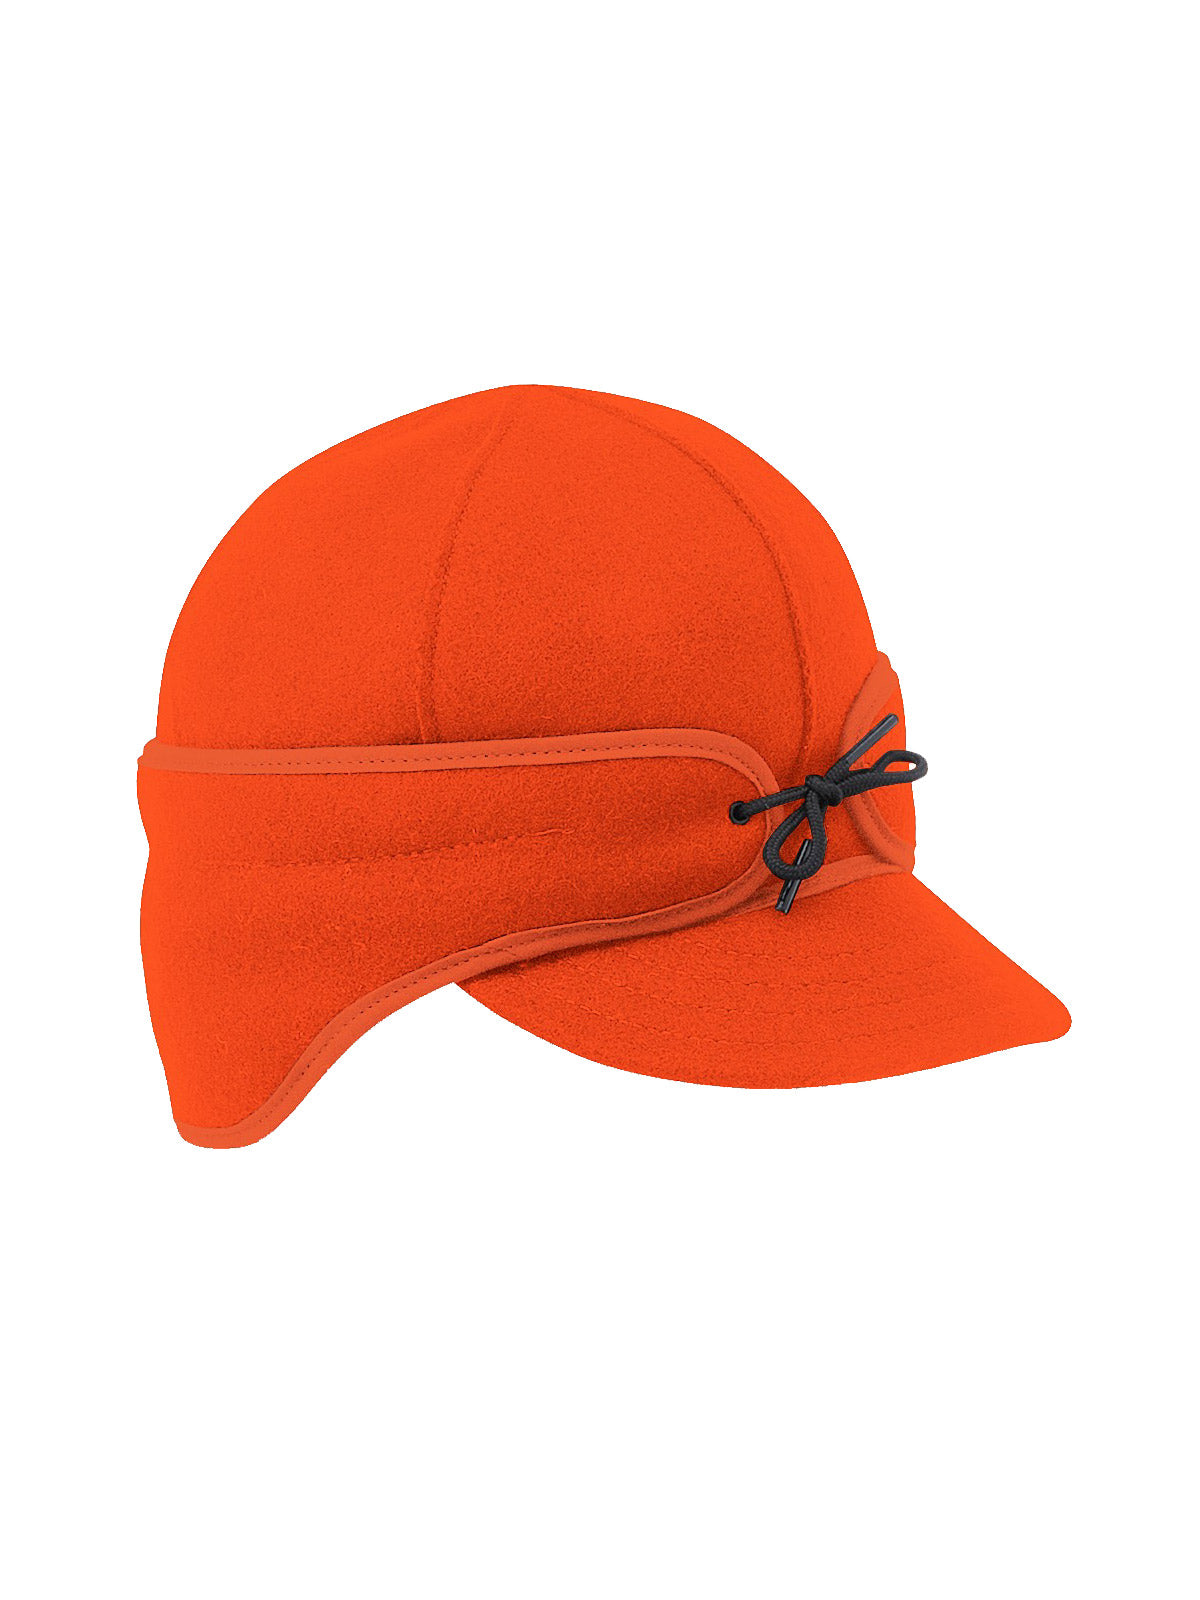 Stormy Kromer Rancher Caps With Ear Band in Orange - 50500-ORA